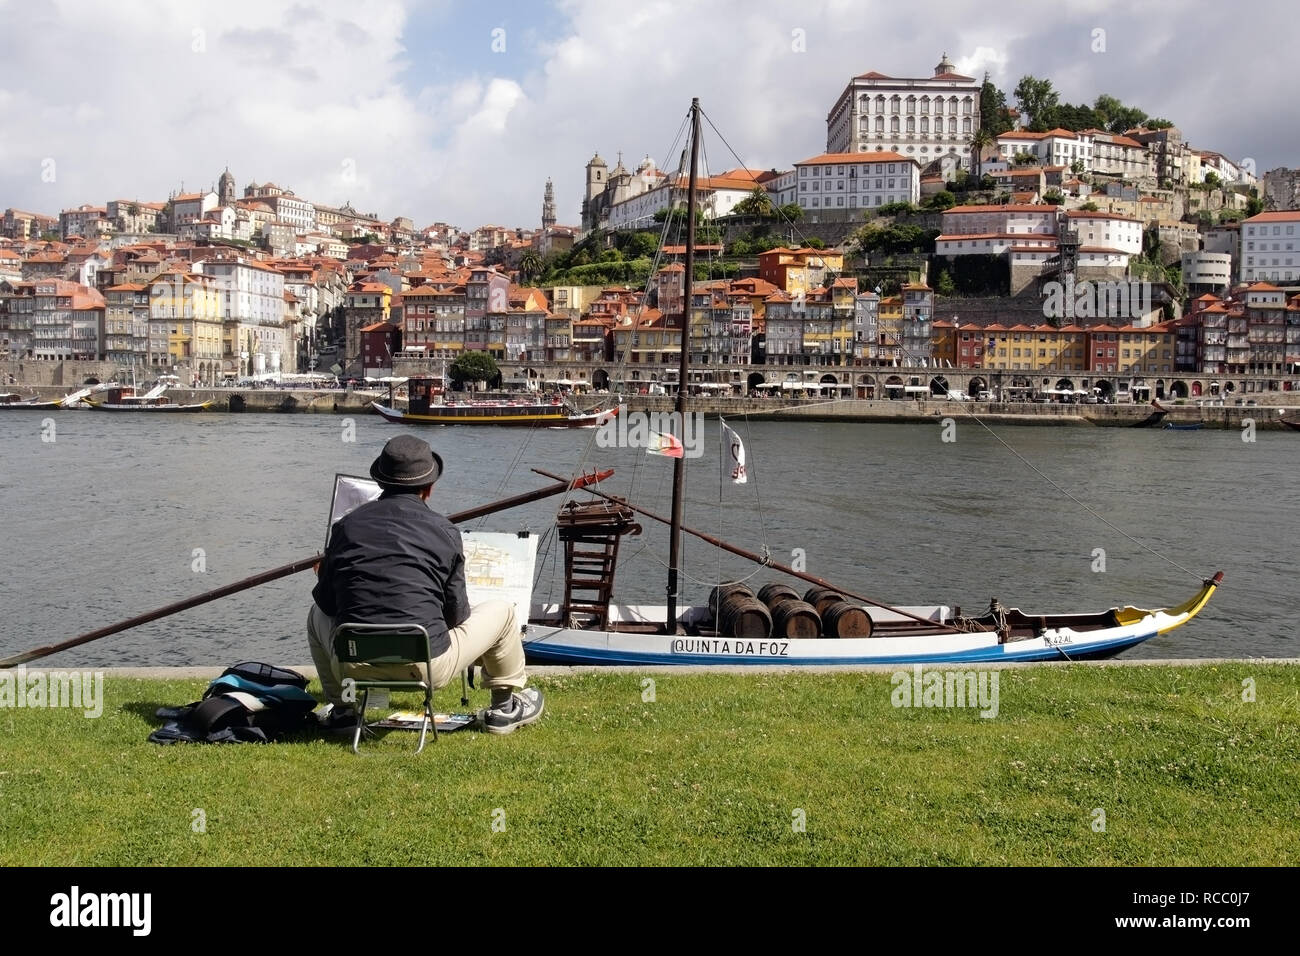 Porto, Portugal - May 26, 2012: Ribeira do Porto as seen from the opposite bank of the Douro River, the twin city of Vila Nova de Gaia, seeing in the  Stock Photo